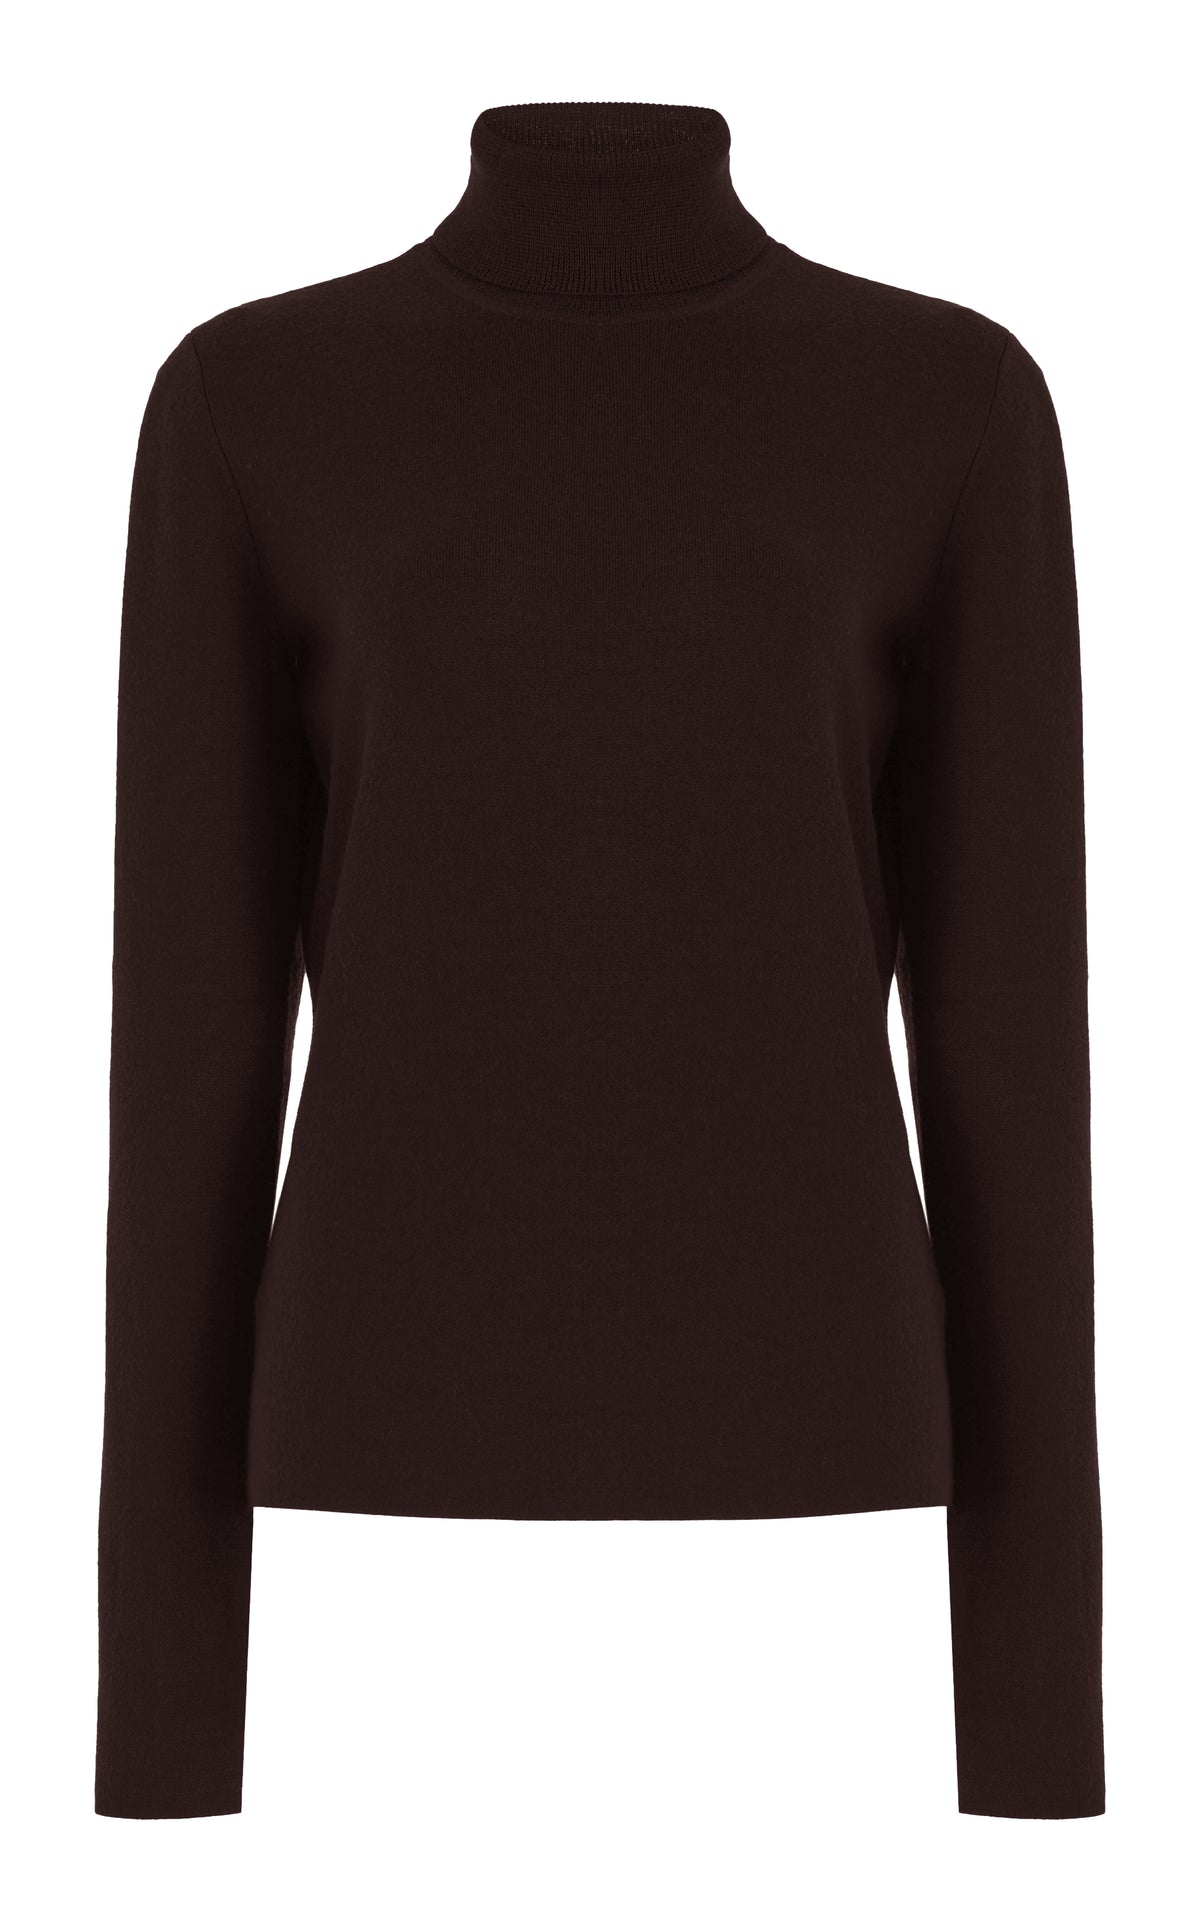 May Knit Turtleneck in Chocolate Merino Wool Cashmere